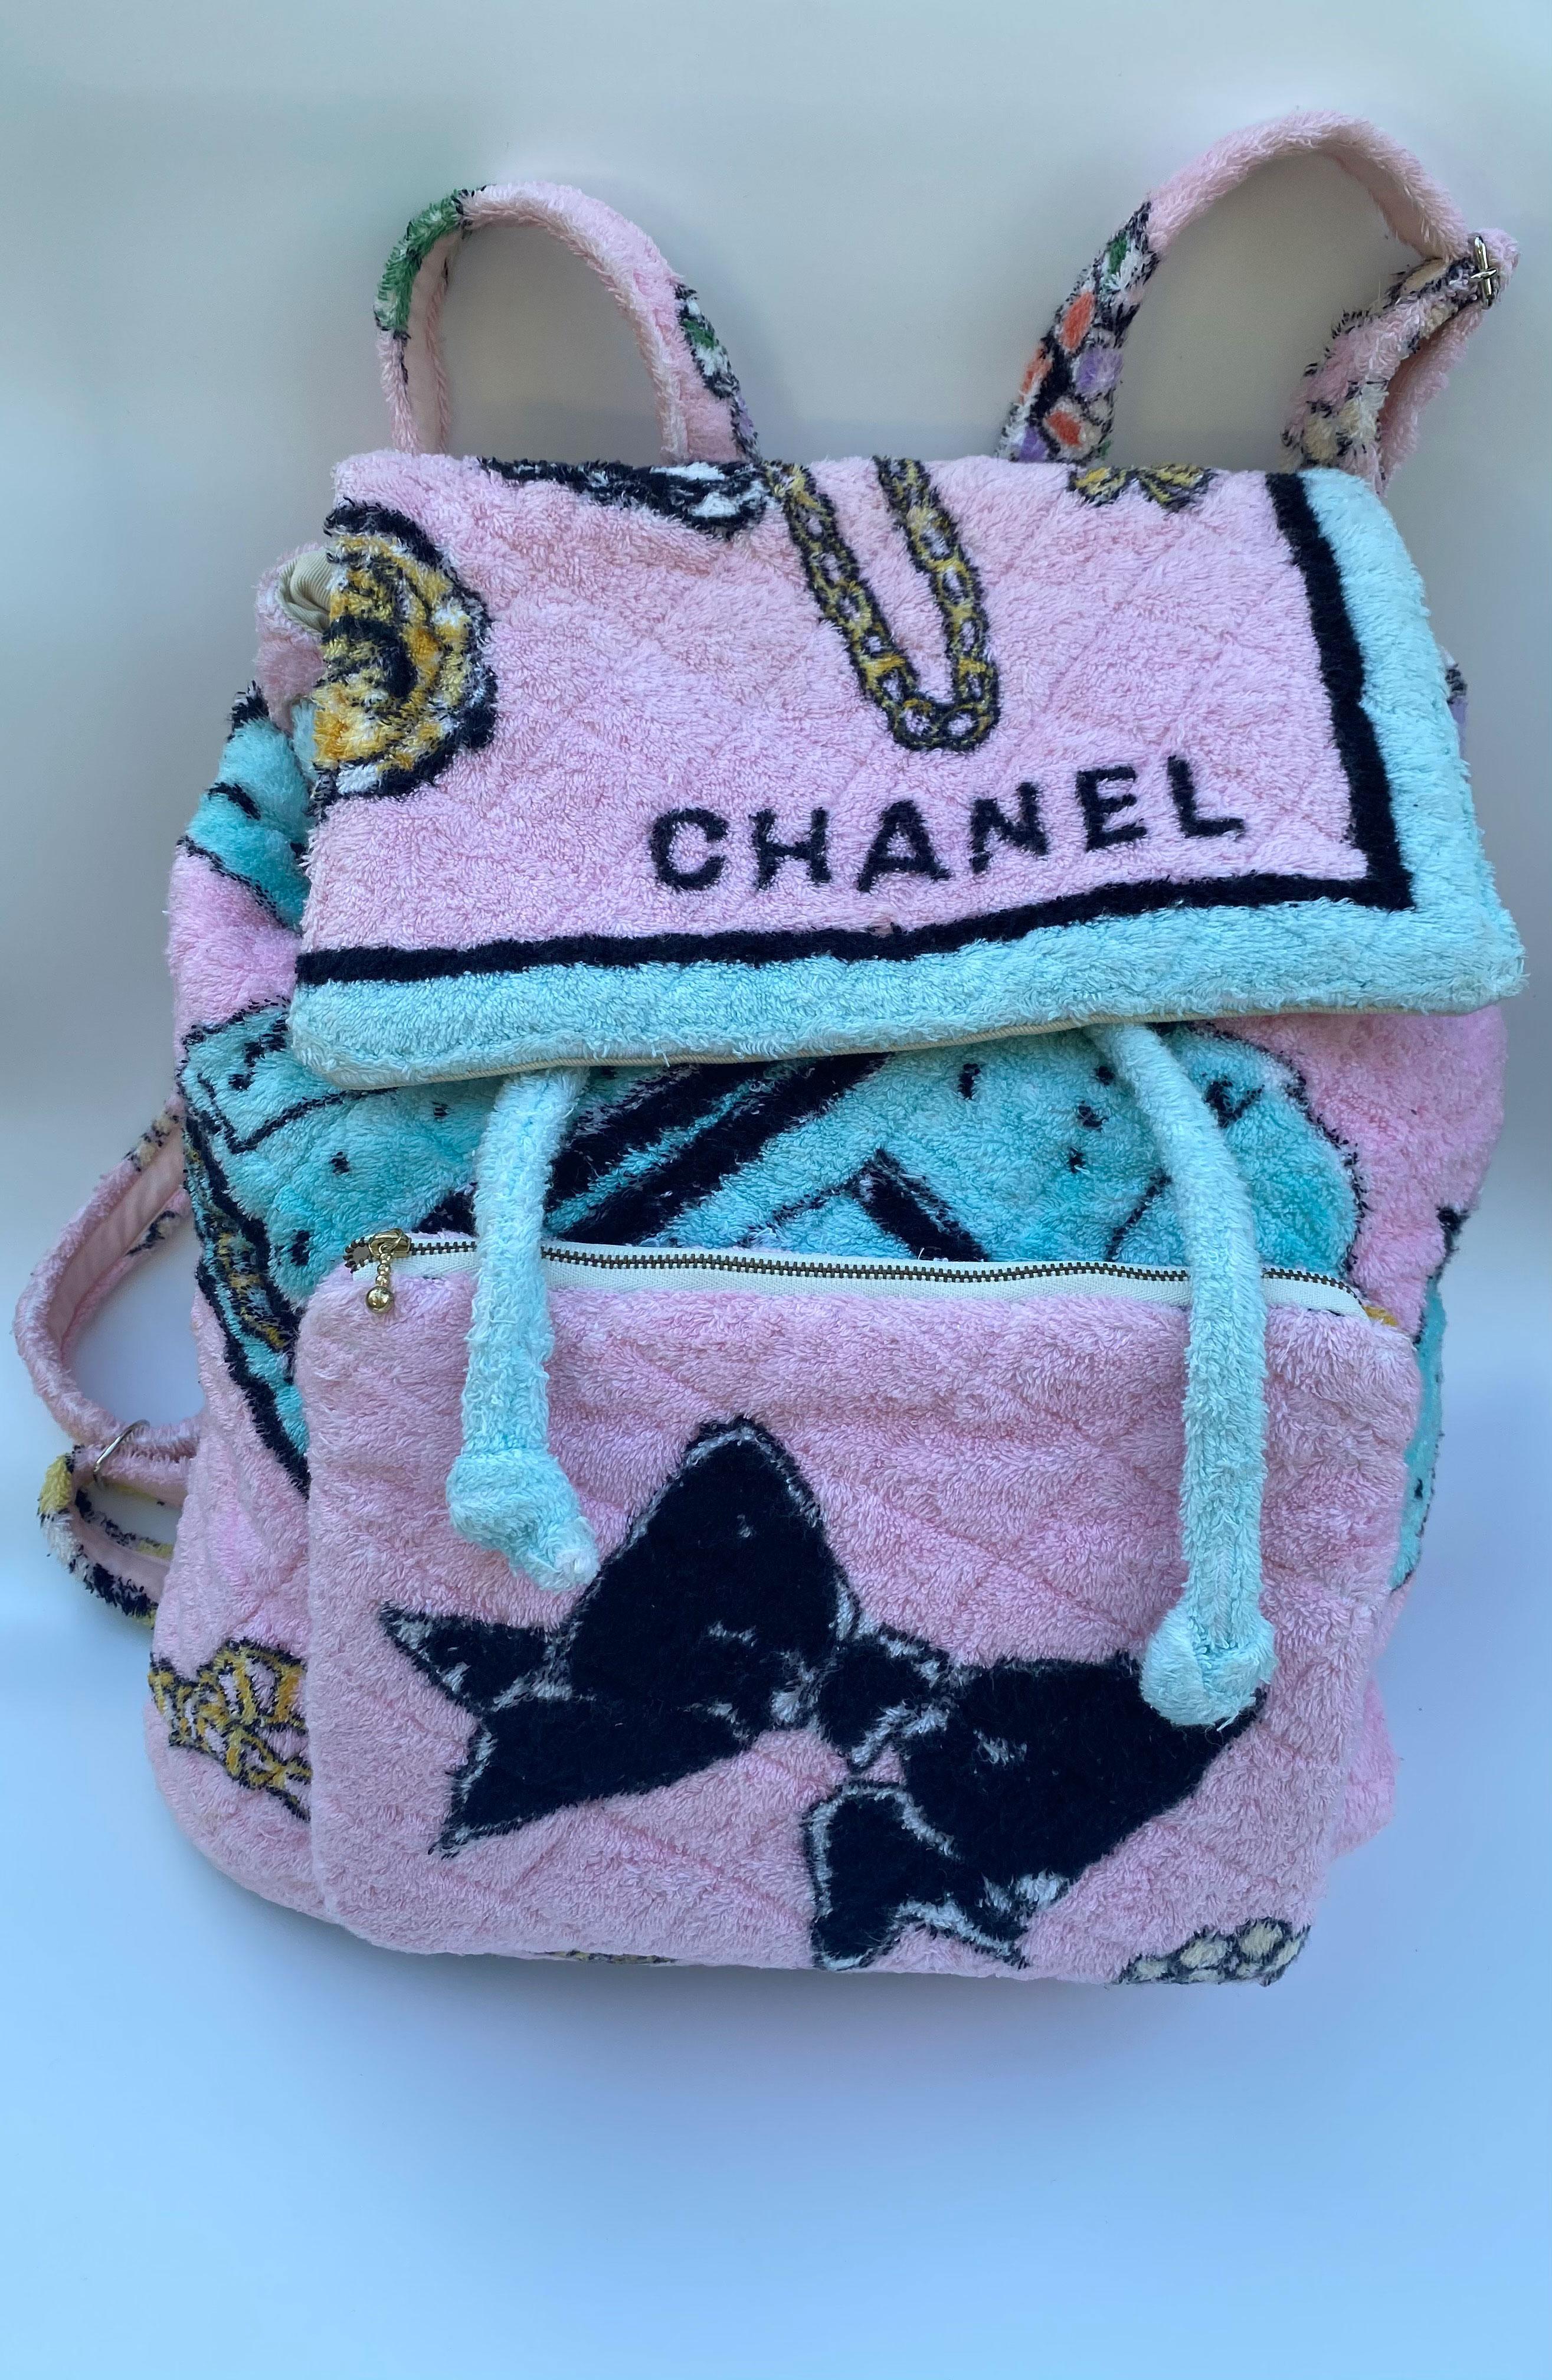 Chanel Vintage 1994 Rare Limited Edition Towel Jumbo Beach Pink Terry Cloth Back 1